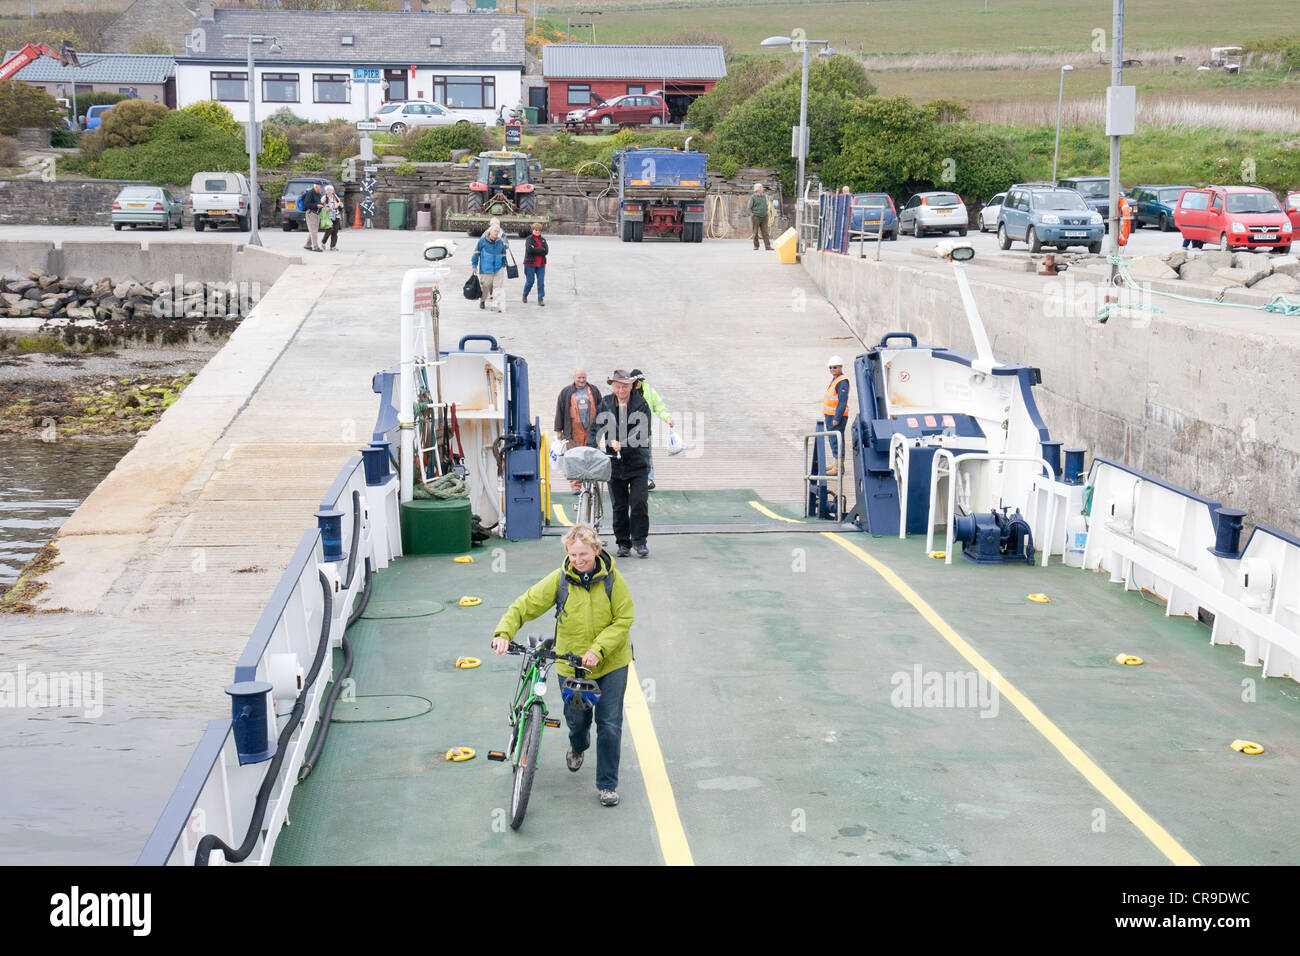 The Island of Rousay cyclists boarding the ferry - Orkney Islands, Scotland Stock Photo